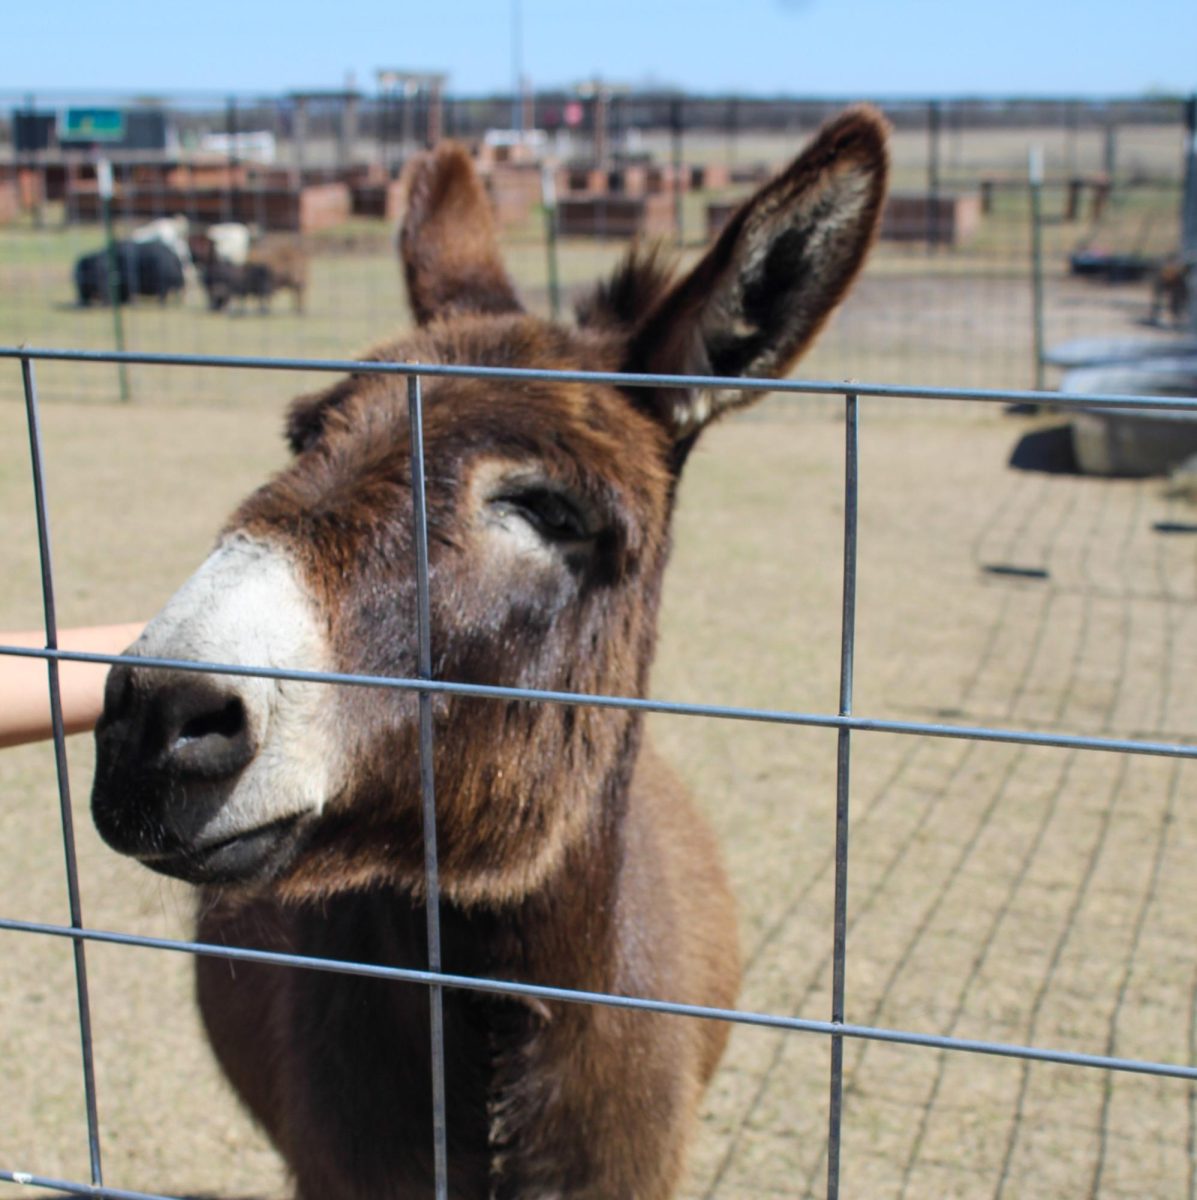 Jerry+the+miniature+donkey+has+recently+joined+the+other+animals+on+the+farm+on+a+permanent+loan.